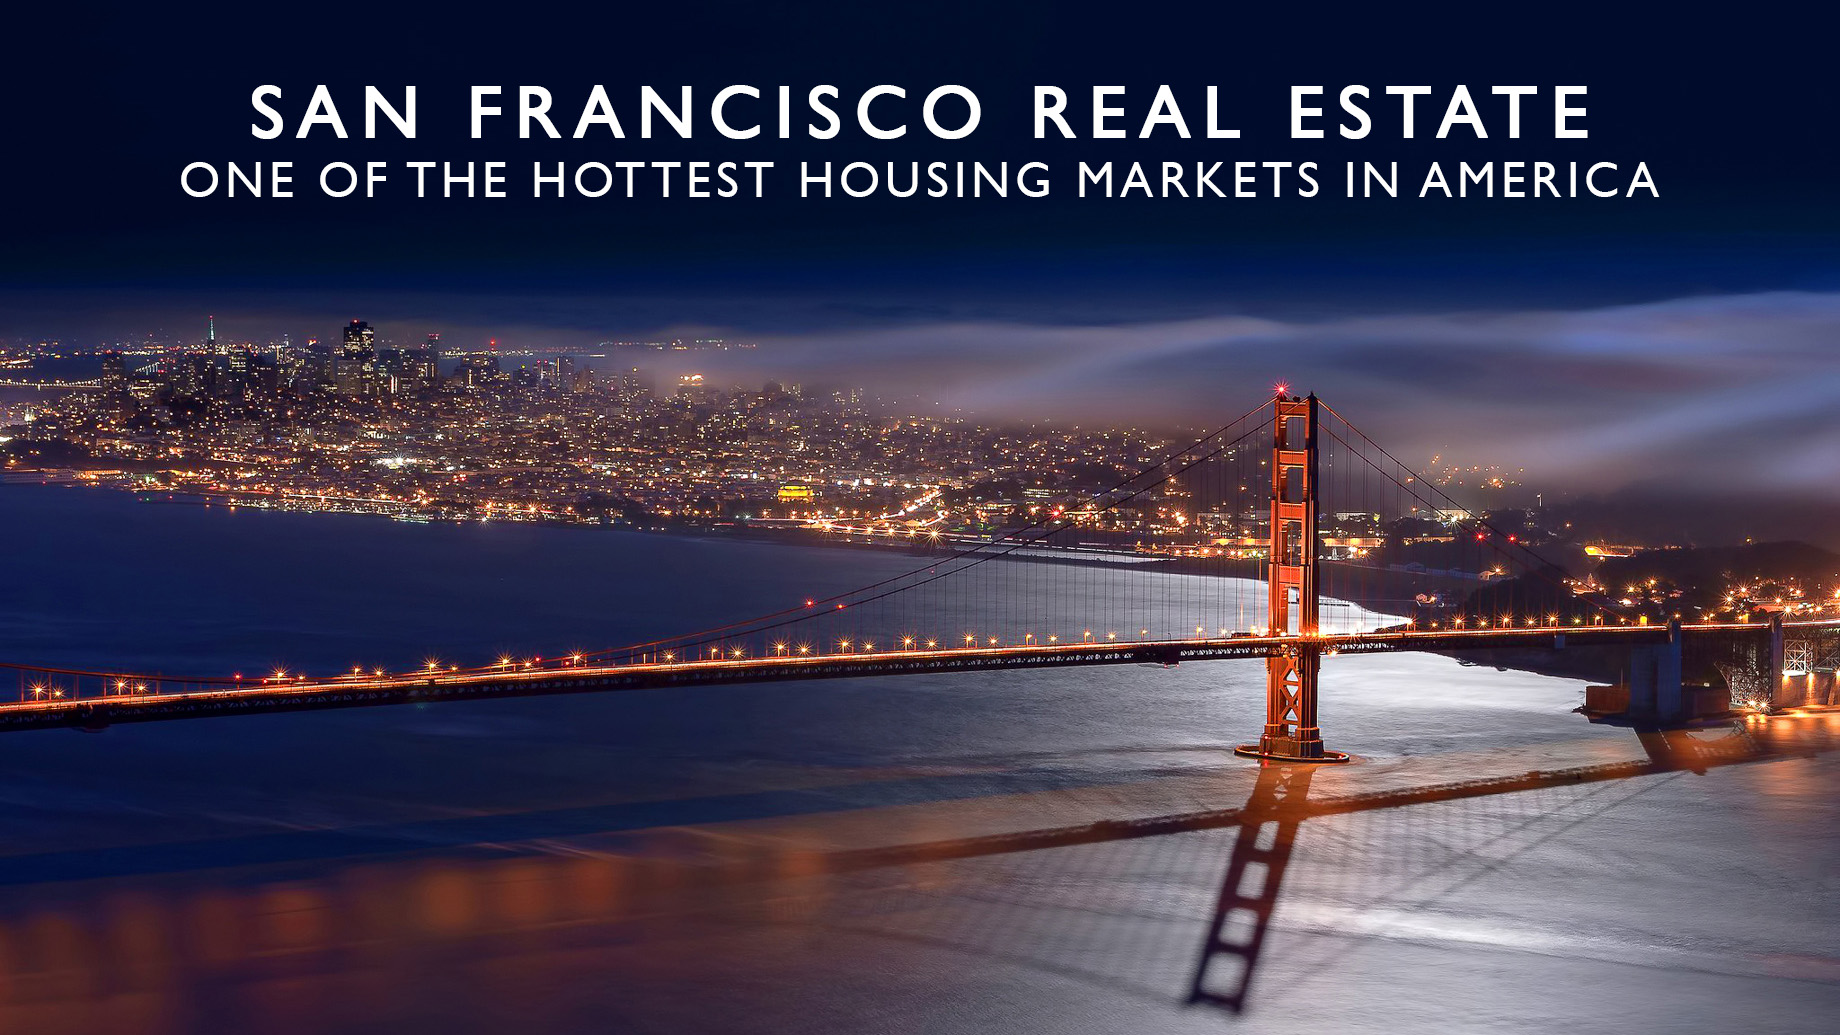 San Francisco Real Estate - One of the Hottest Housing Markets in America